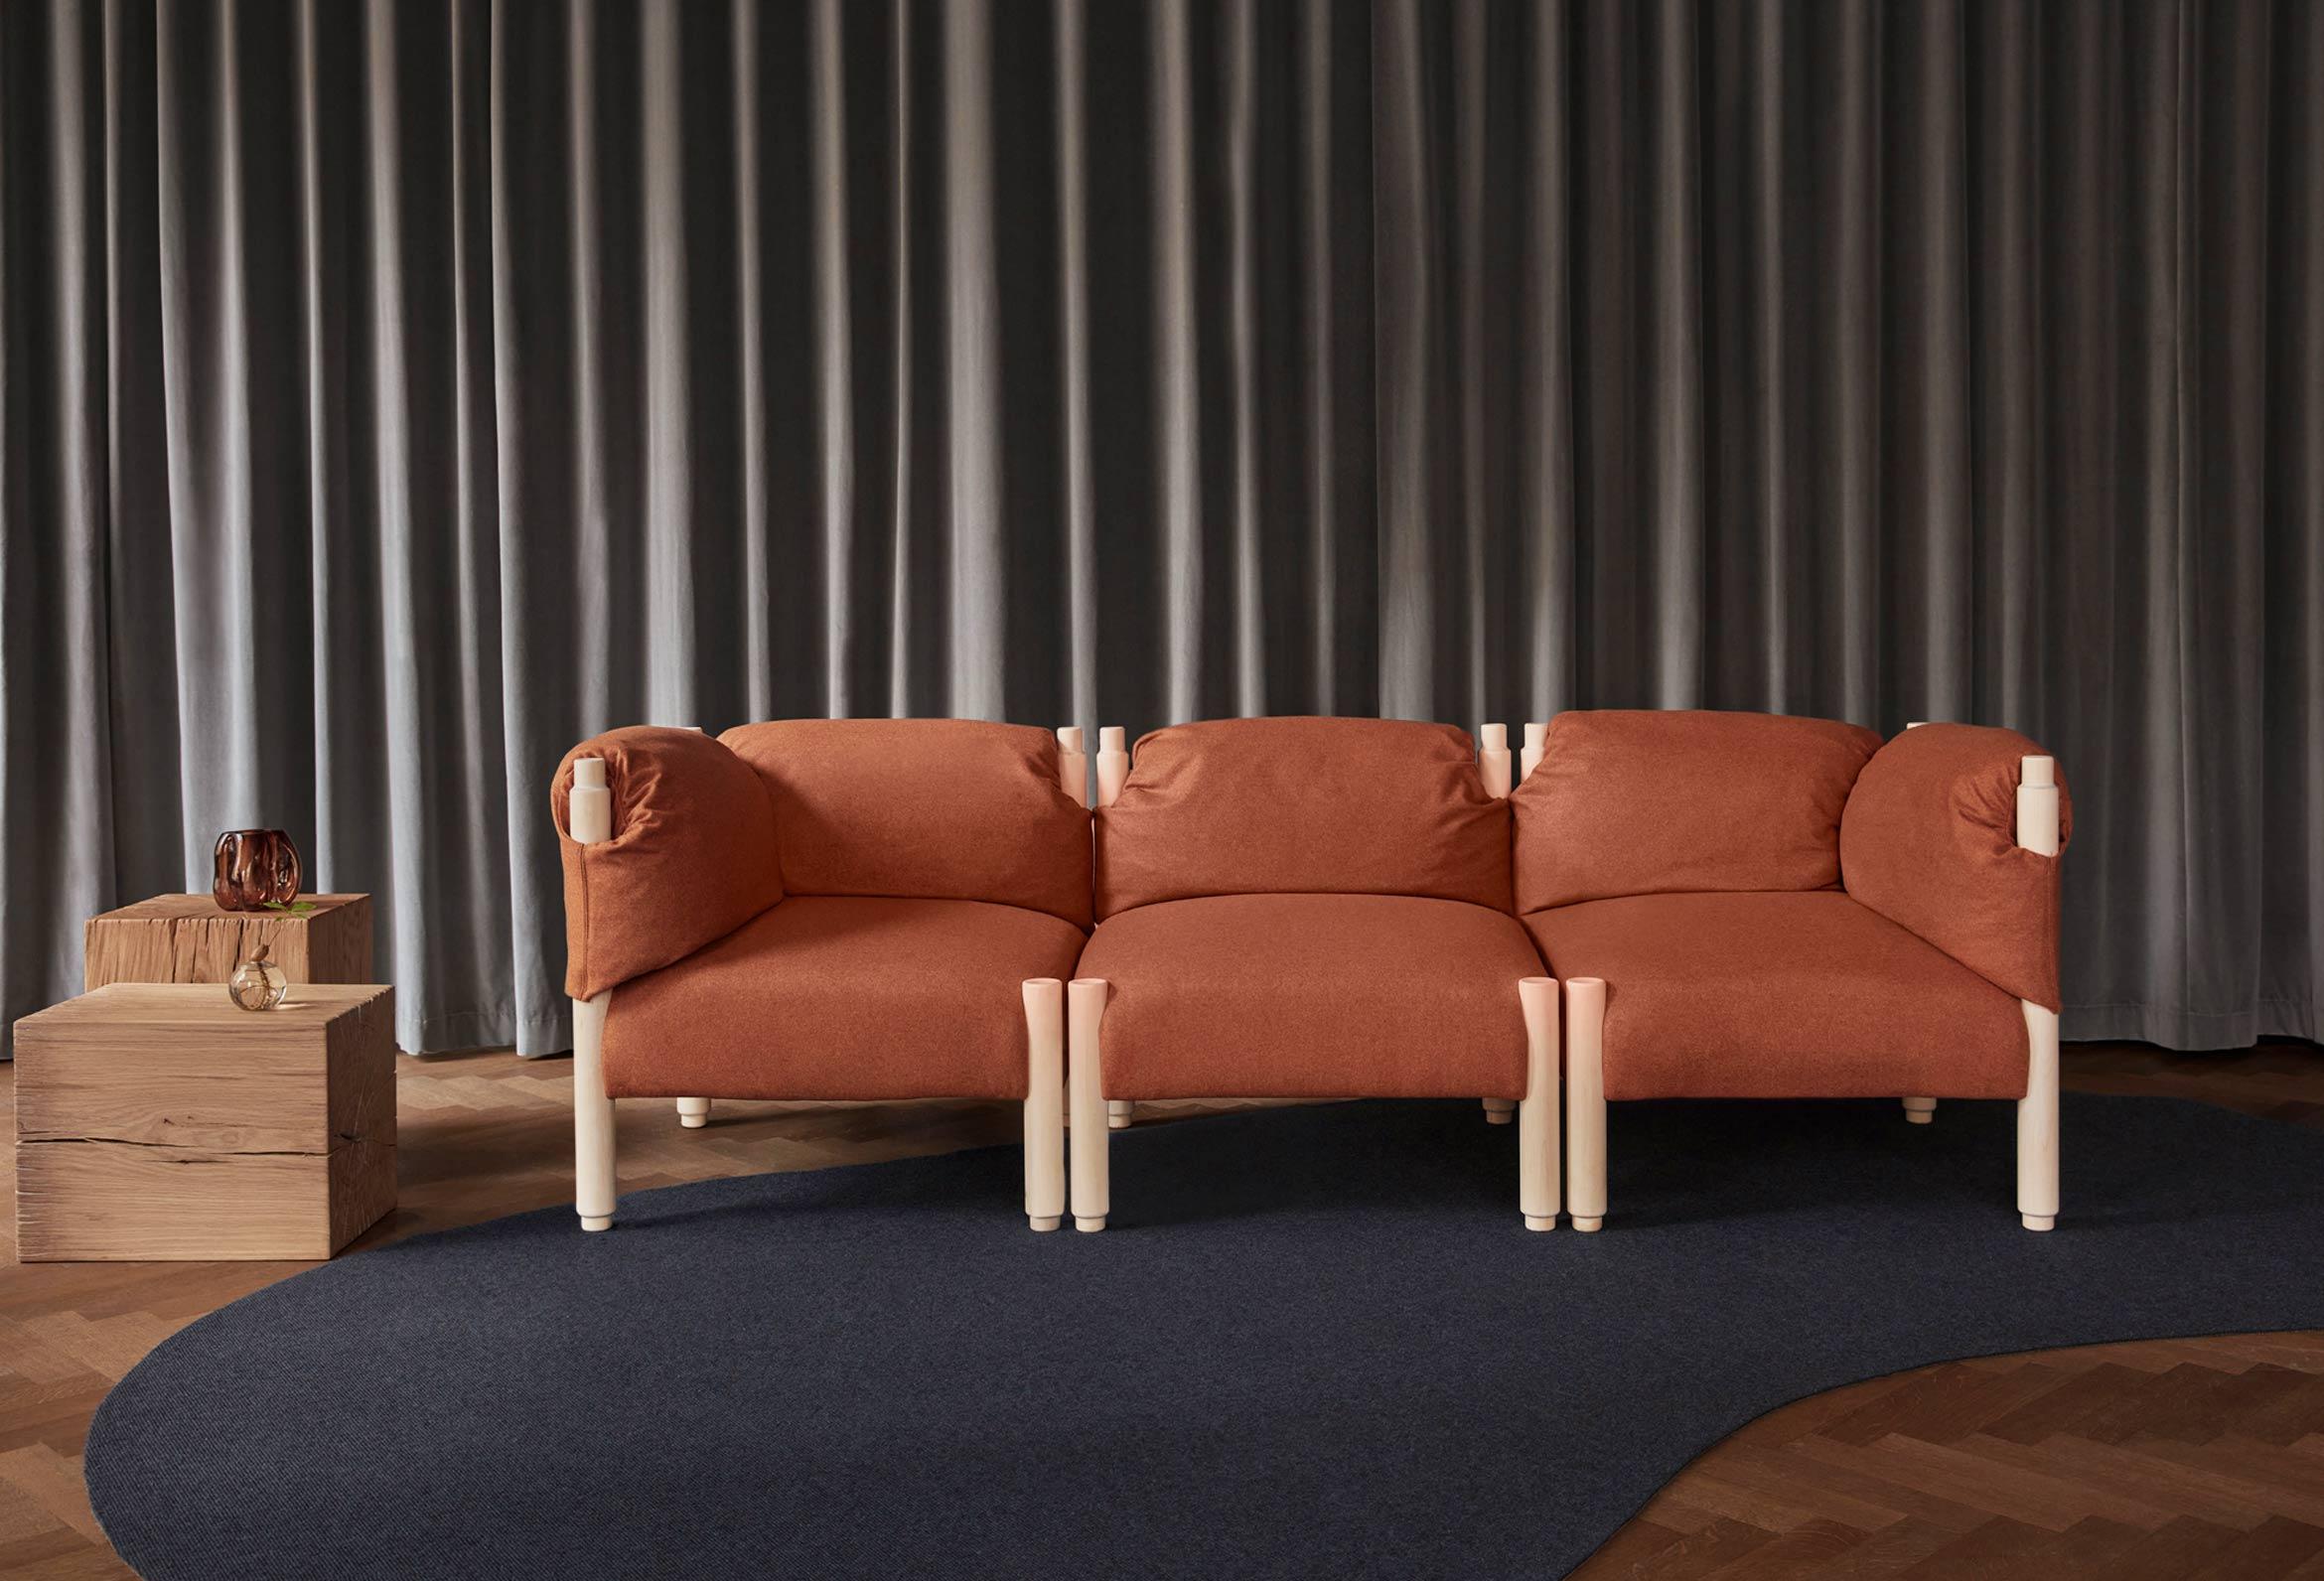 Other Natural and Orange Stand by Me Sofa by Storängen Design For Sale